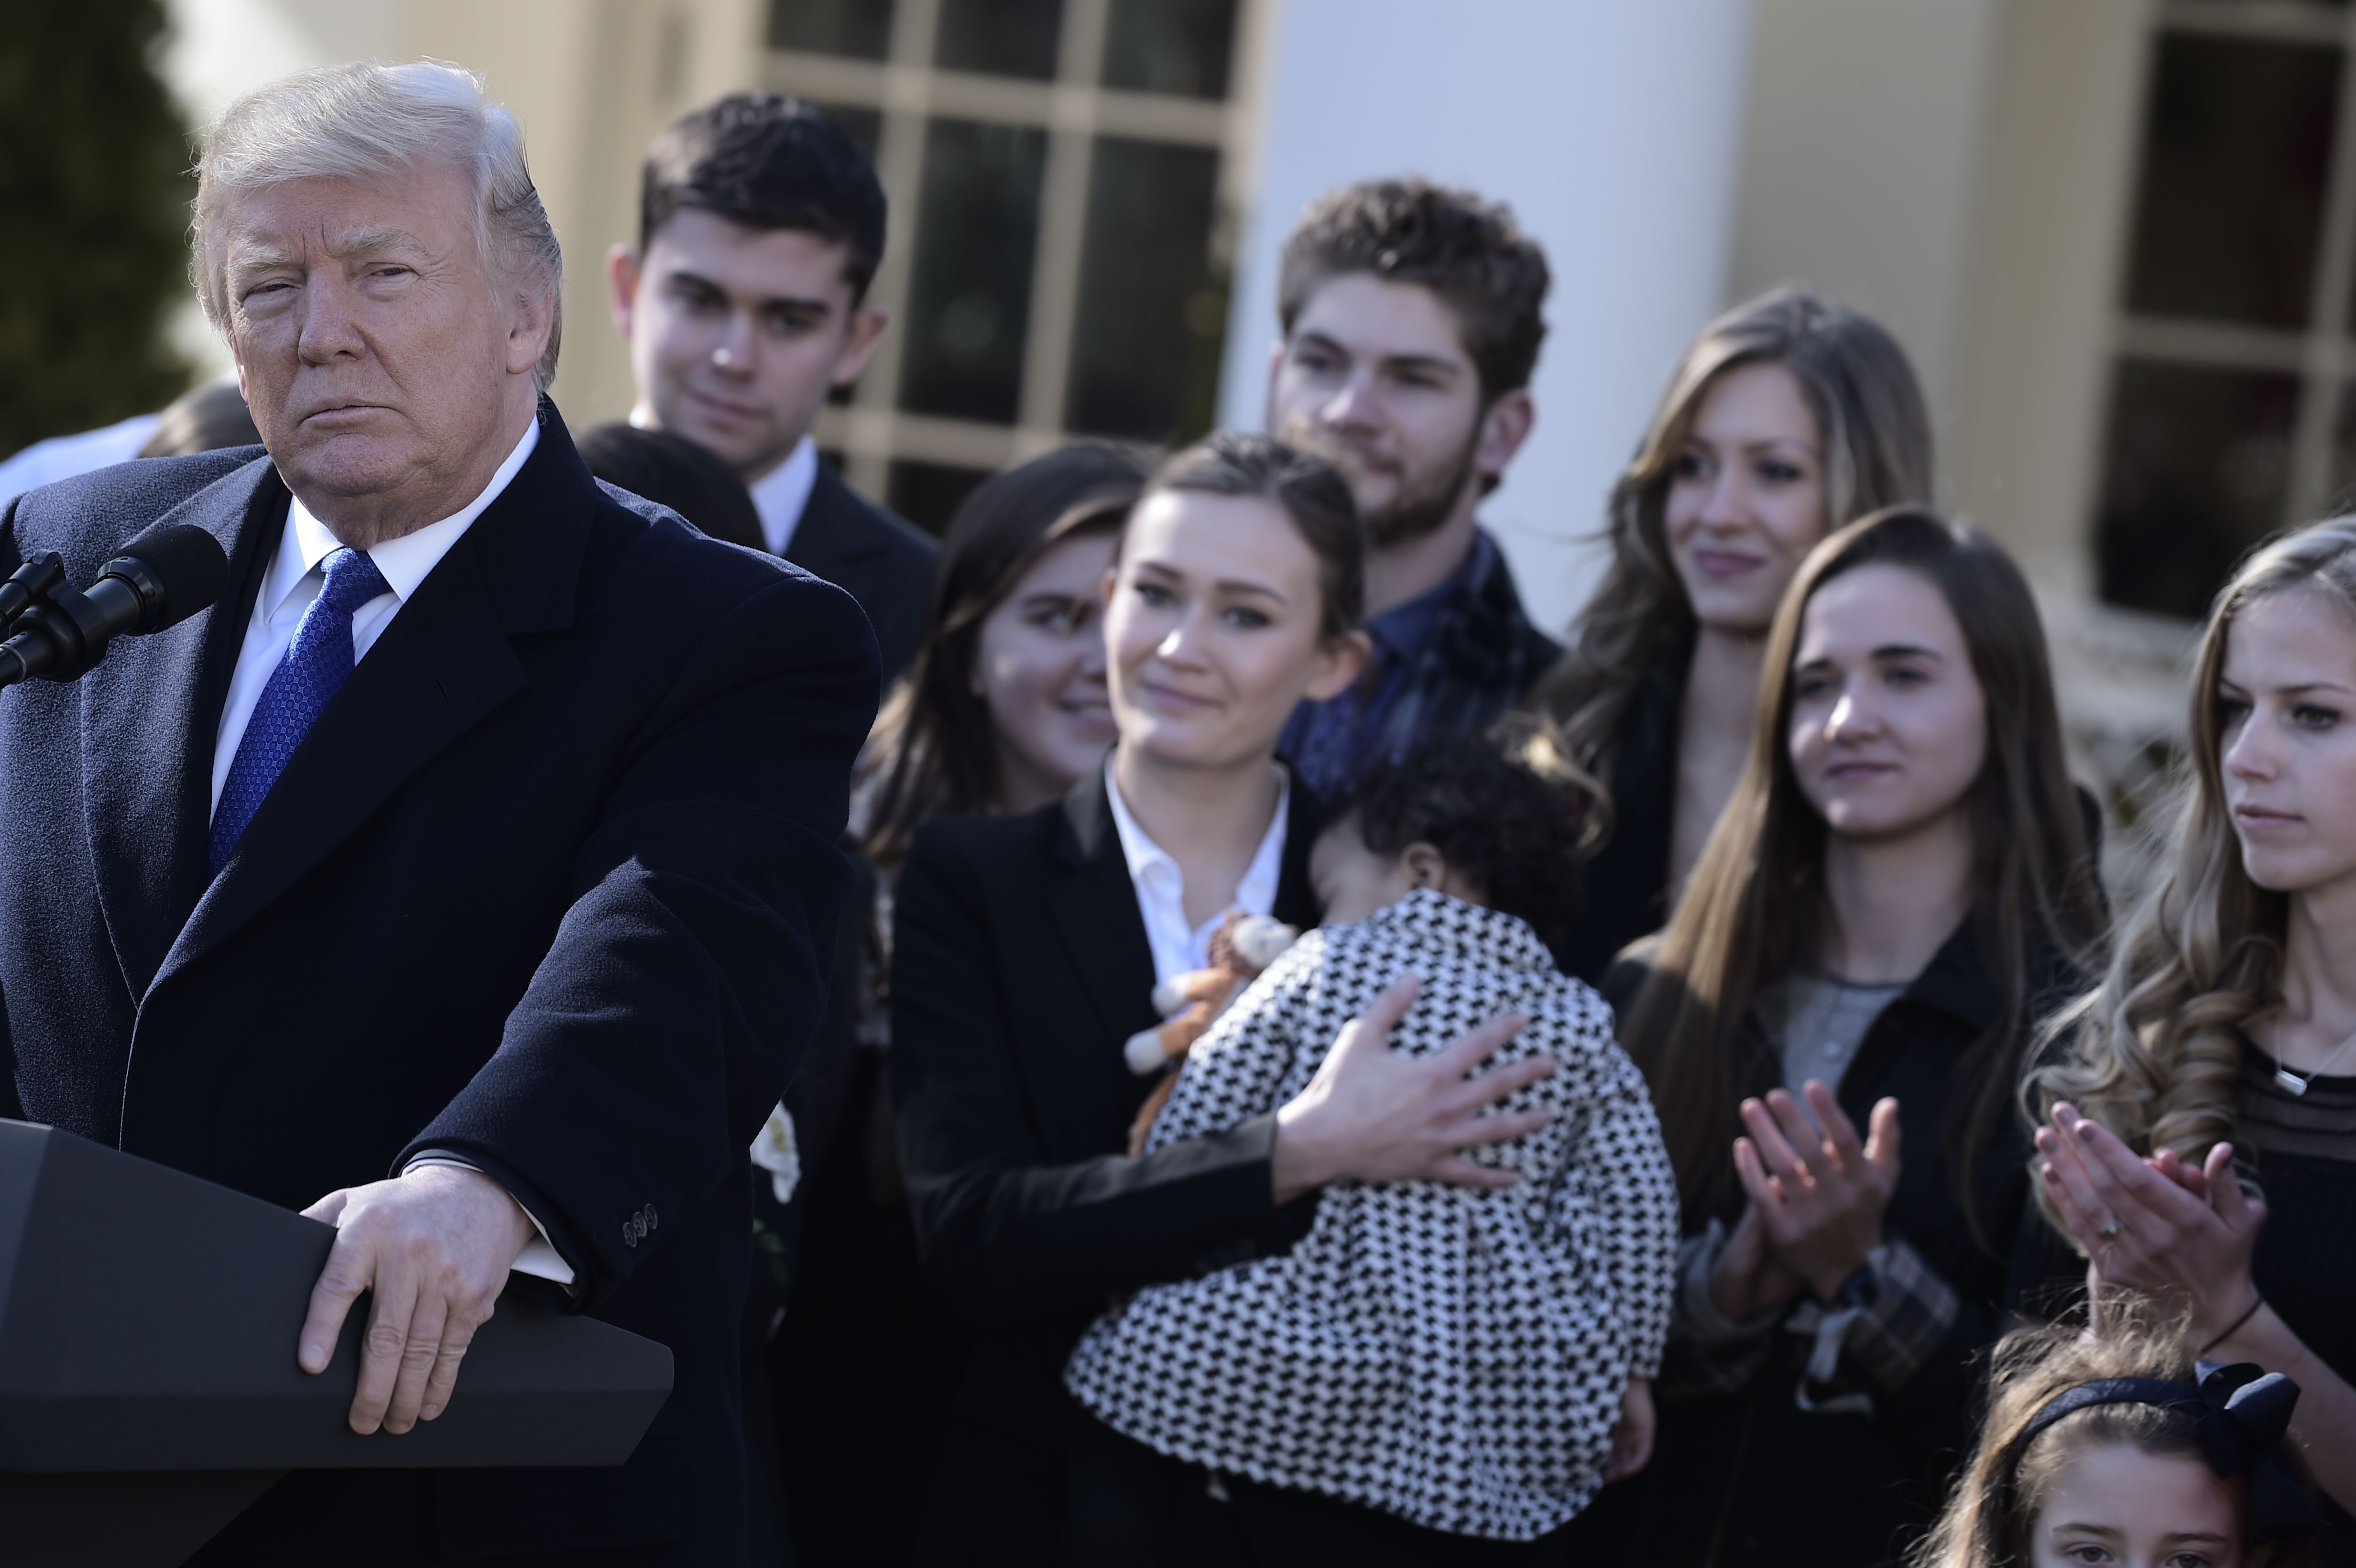 US President Donald Trump speaks live via video link to the annual "March for Life" participants and anti-abortion leaders on January 19, 2018 from the White House in Washington,DC. The 45th edition of the rally, which describes itself as "the world's largest pro-life event," takes place on the National Mall -- with other scheduled speakers including House Speaker Paul Ryan. / AFP PHOTO / Brendan SMIALOWSKI (Photo credit should read BRENDAN SMIALOWSKI/AFP/Getty Images)